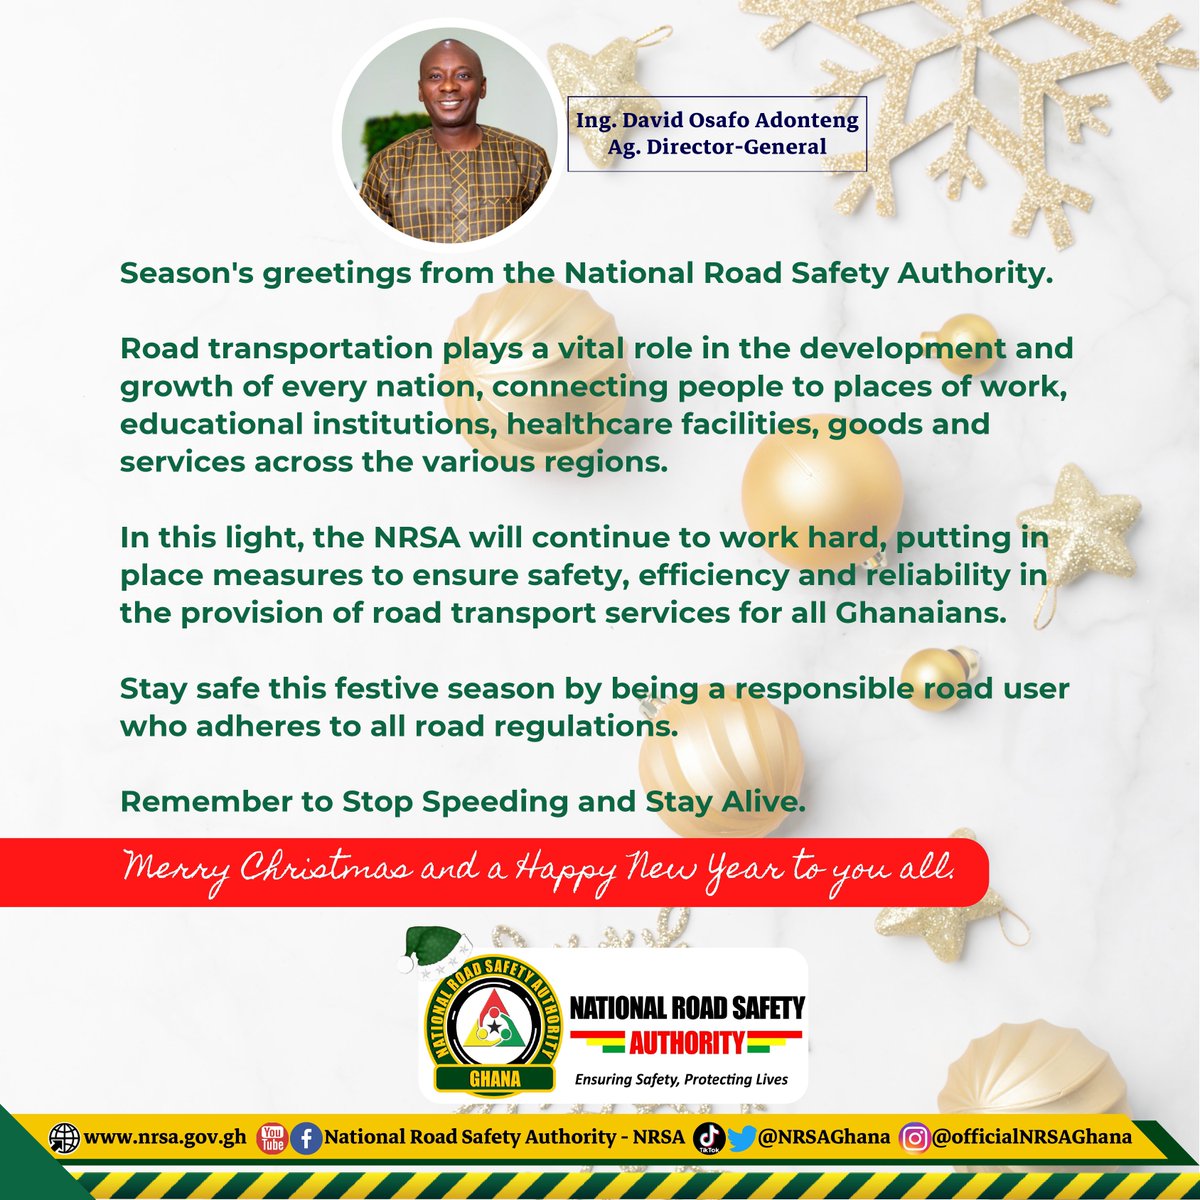 Remember to Stop Speeding and Stay Alive this festive season